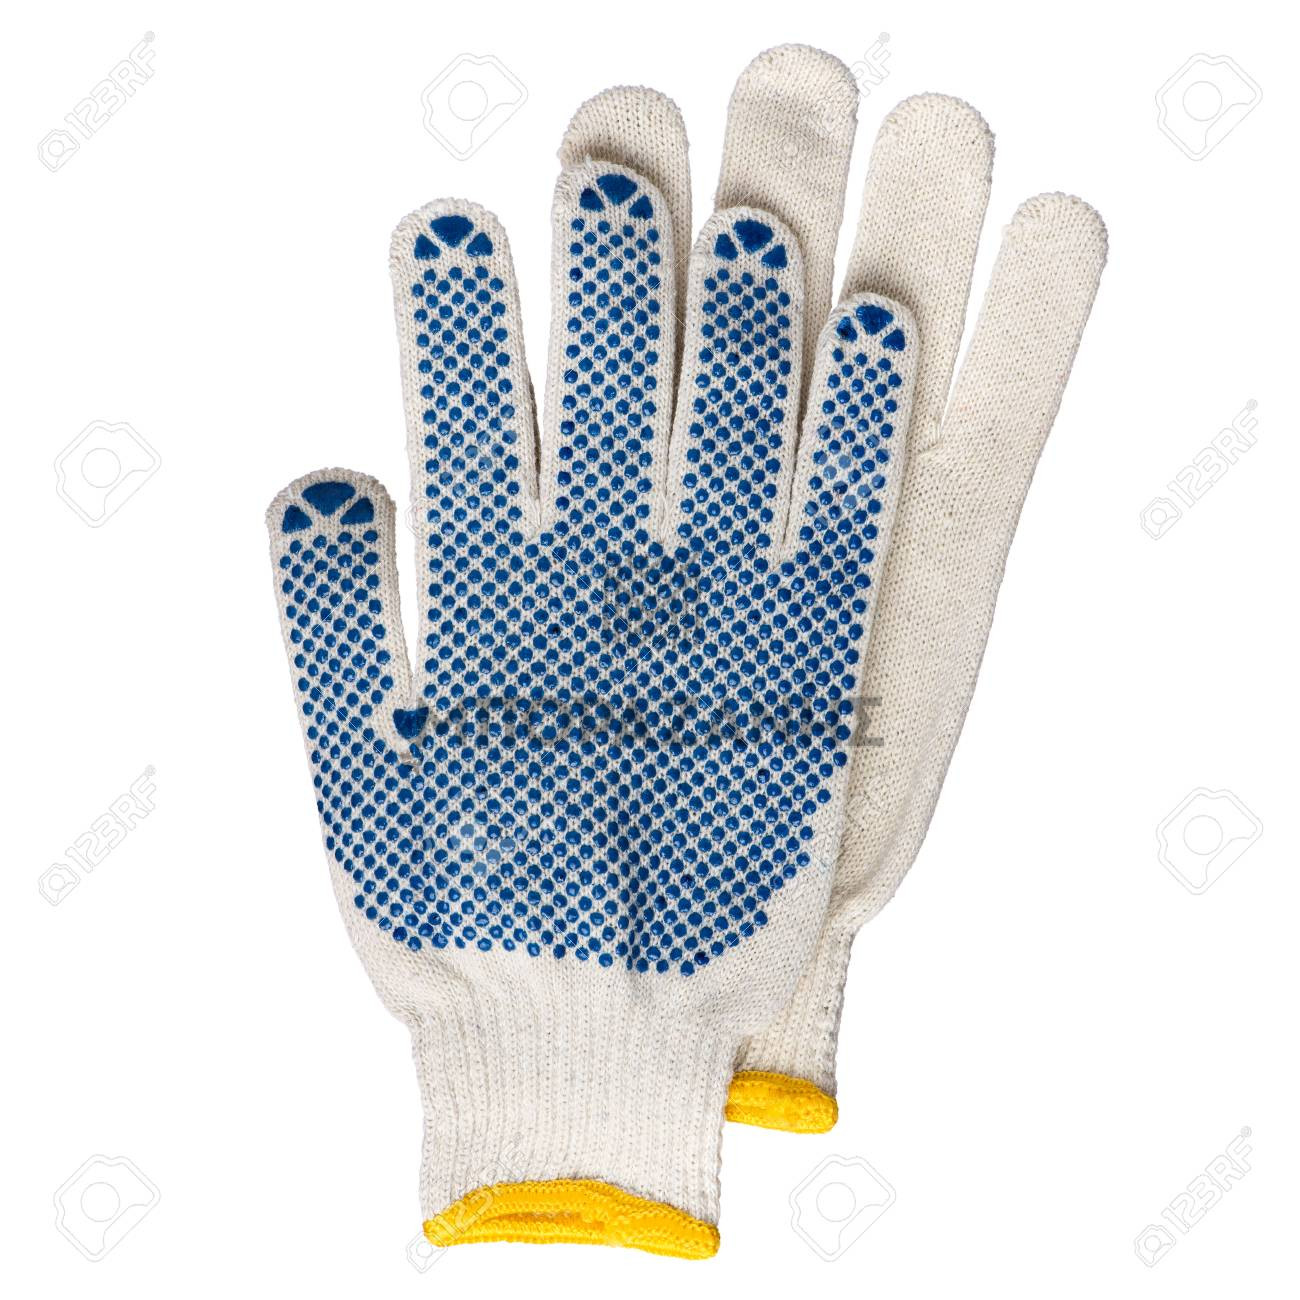 Working gloves isolated on white